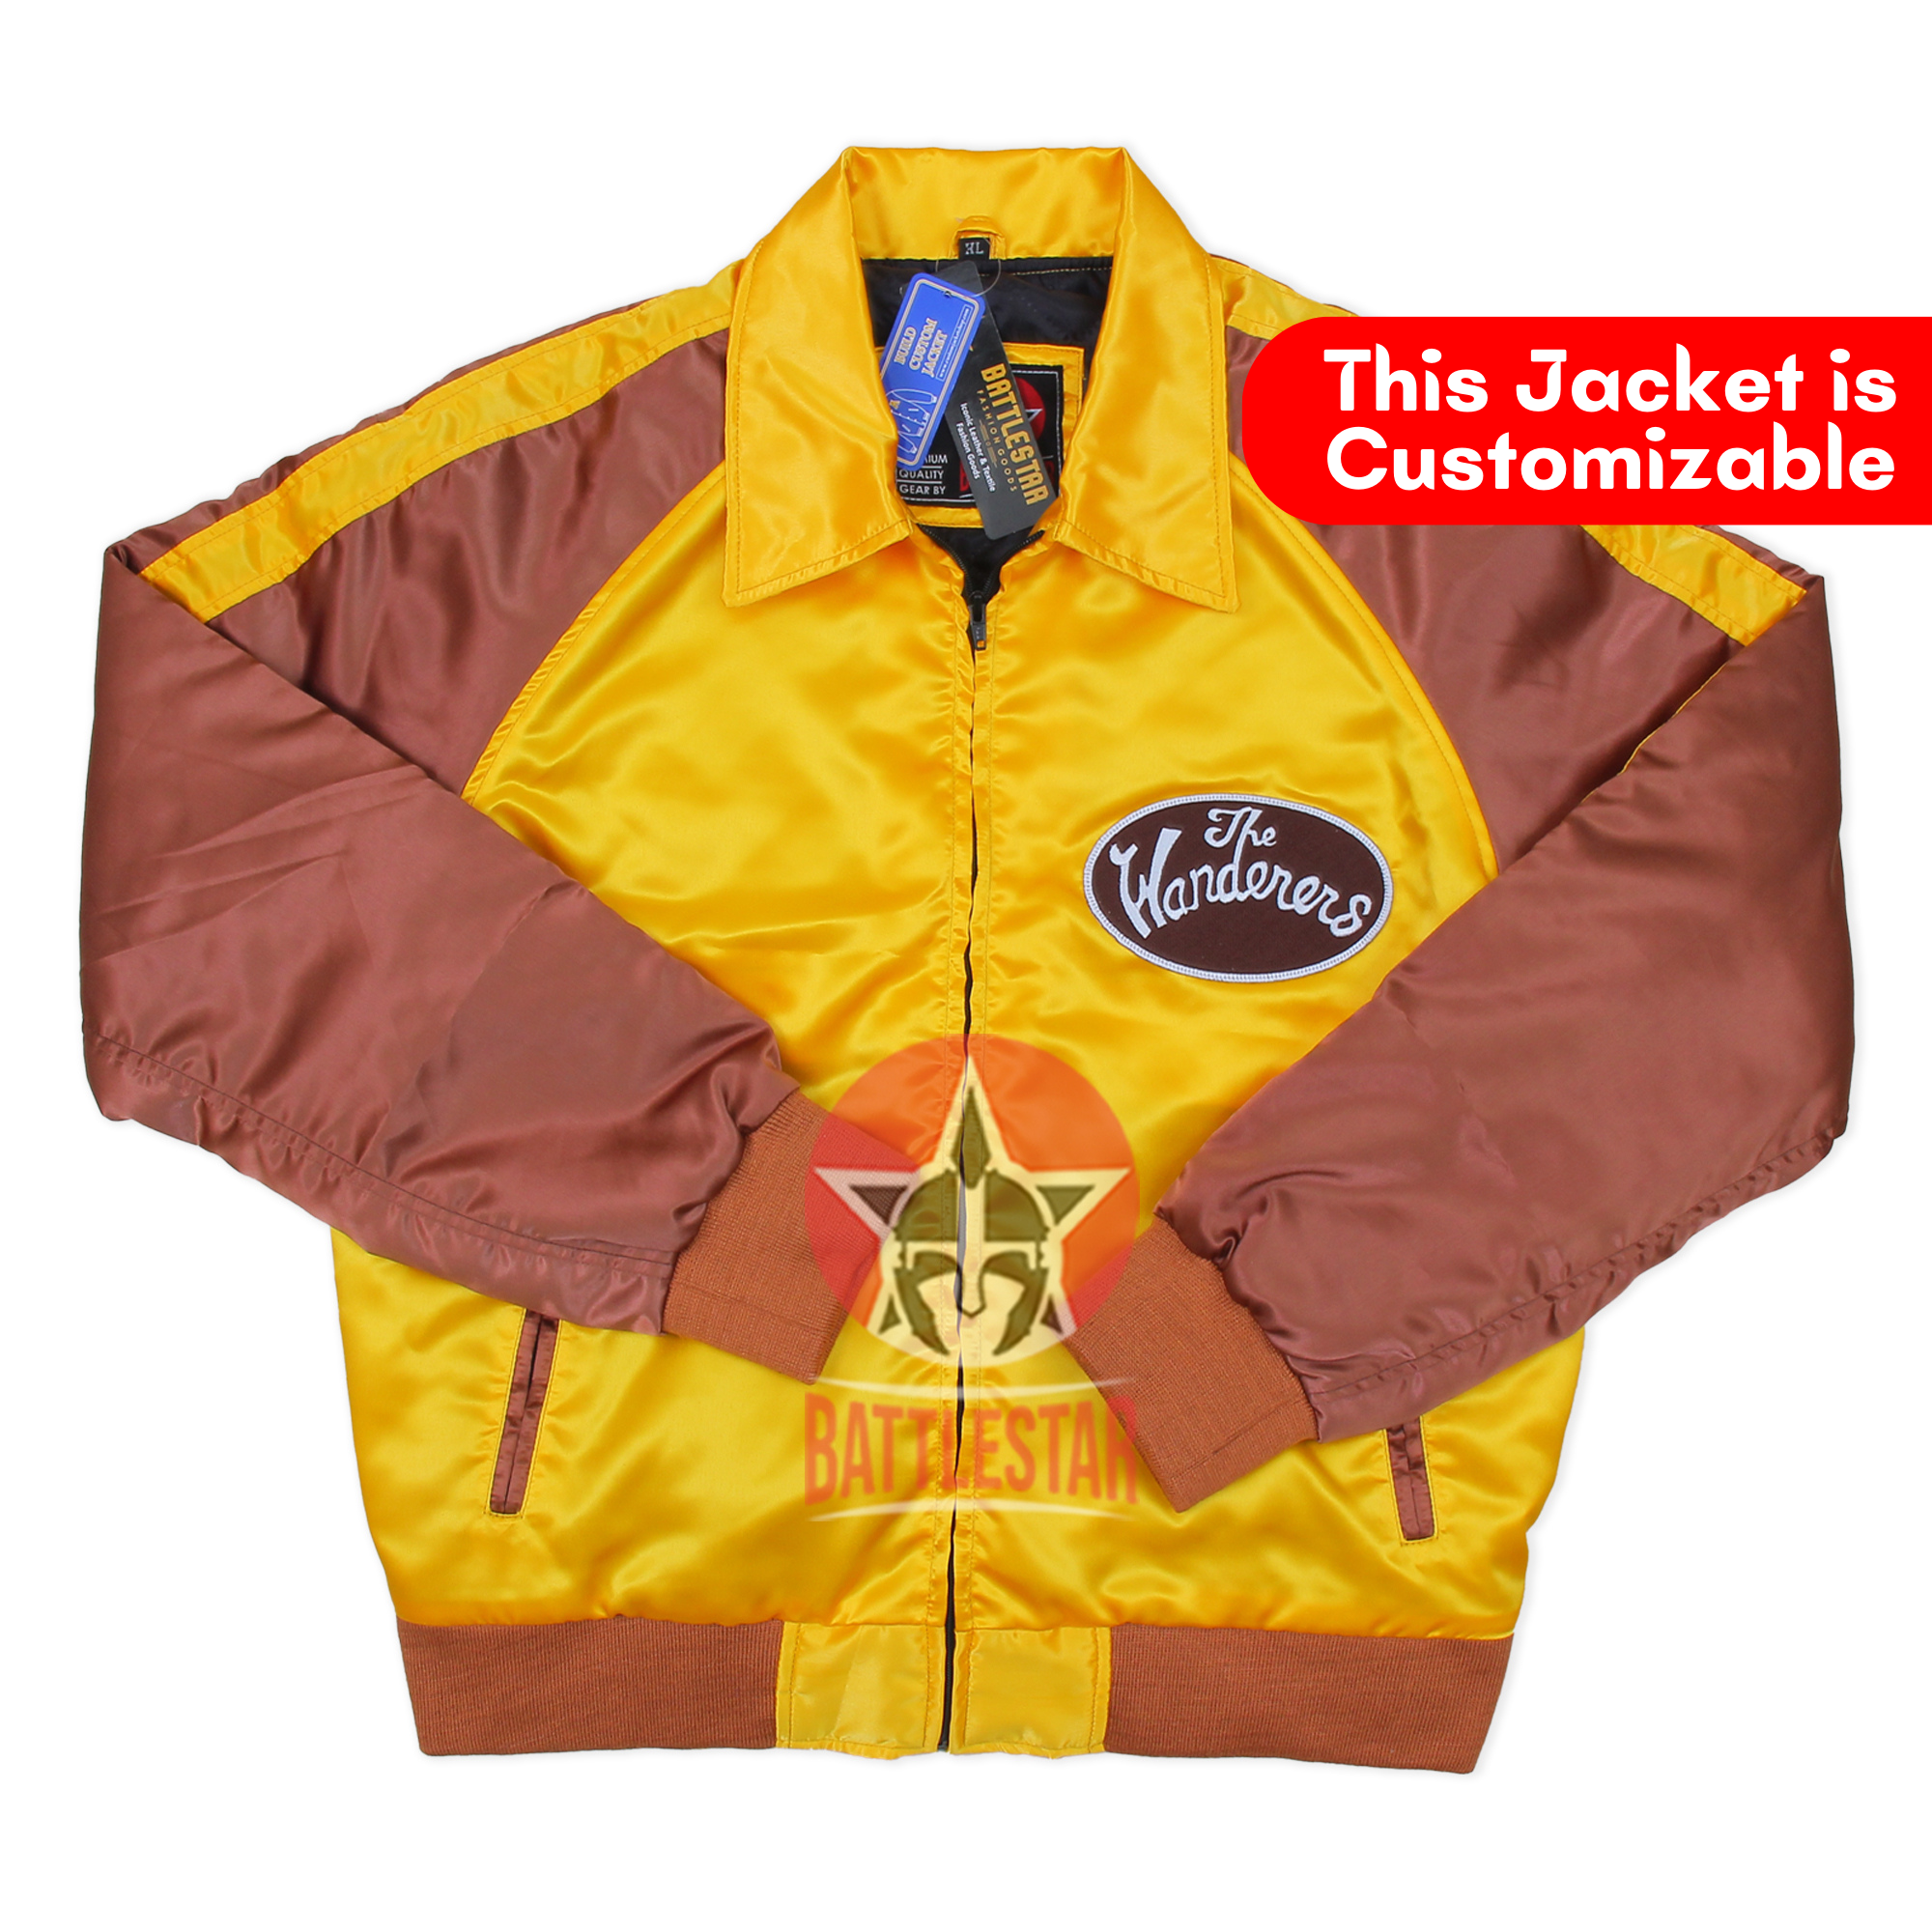 The Wanderers Fancy Party Night Club Gold Bomber Jacket